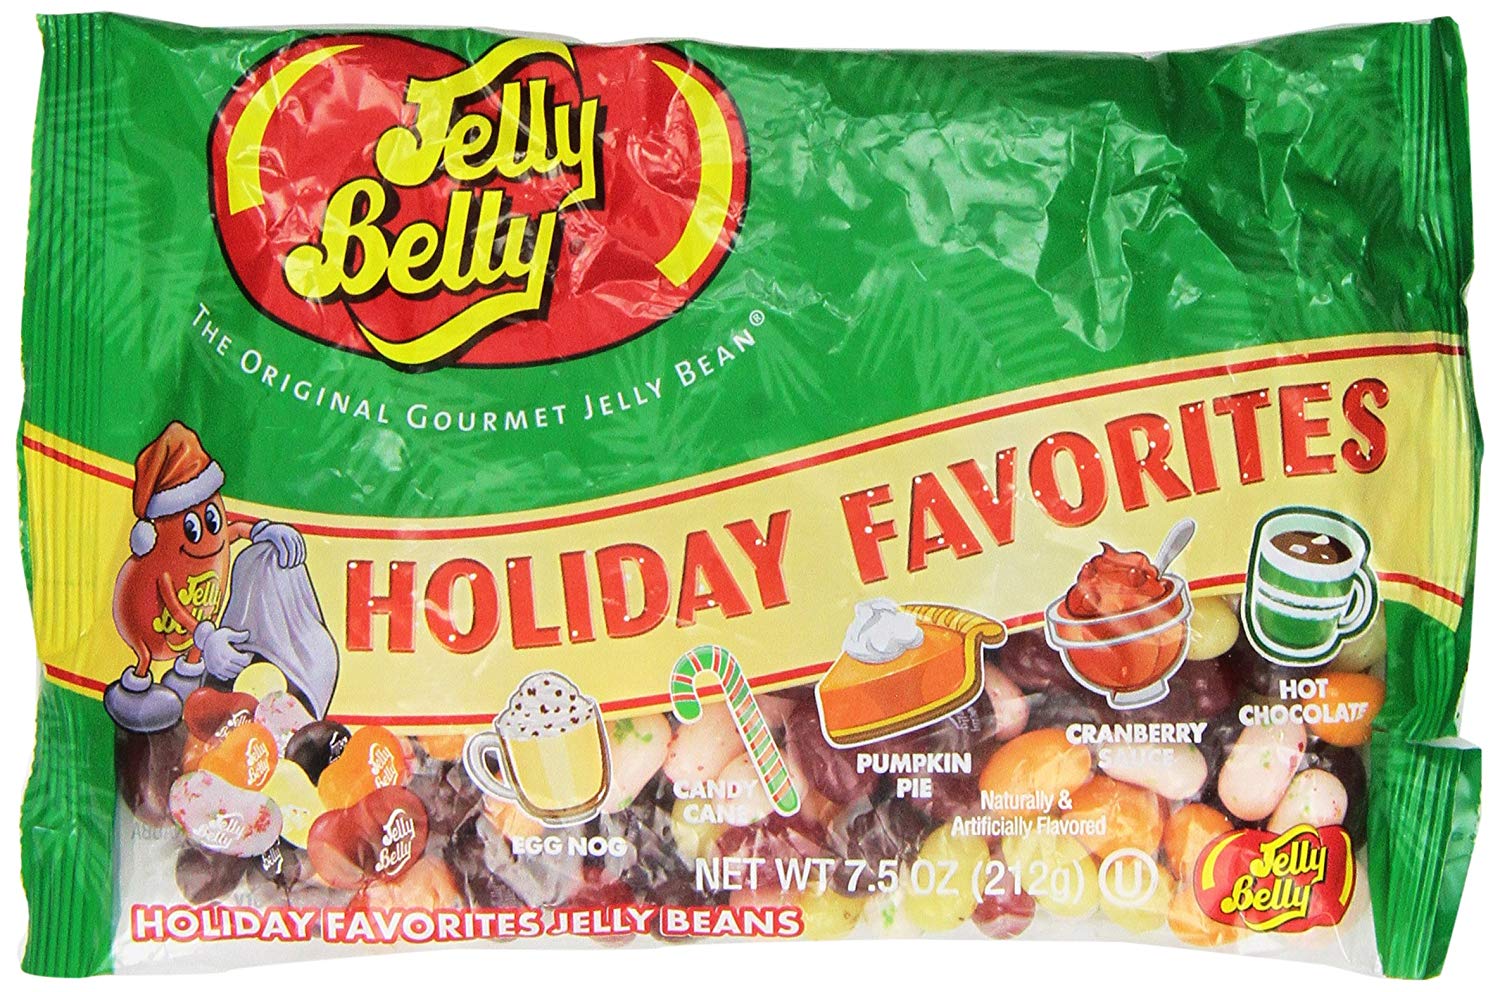 Jelly Belly holiday favorites